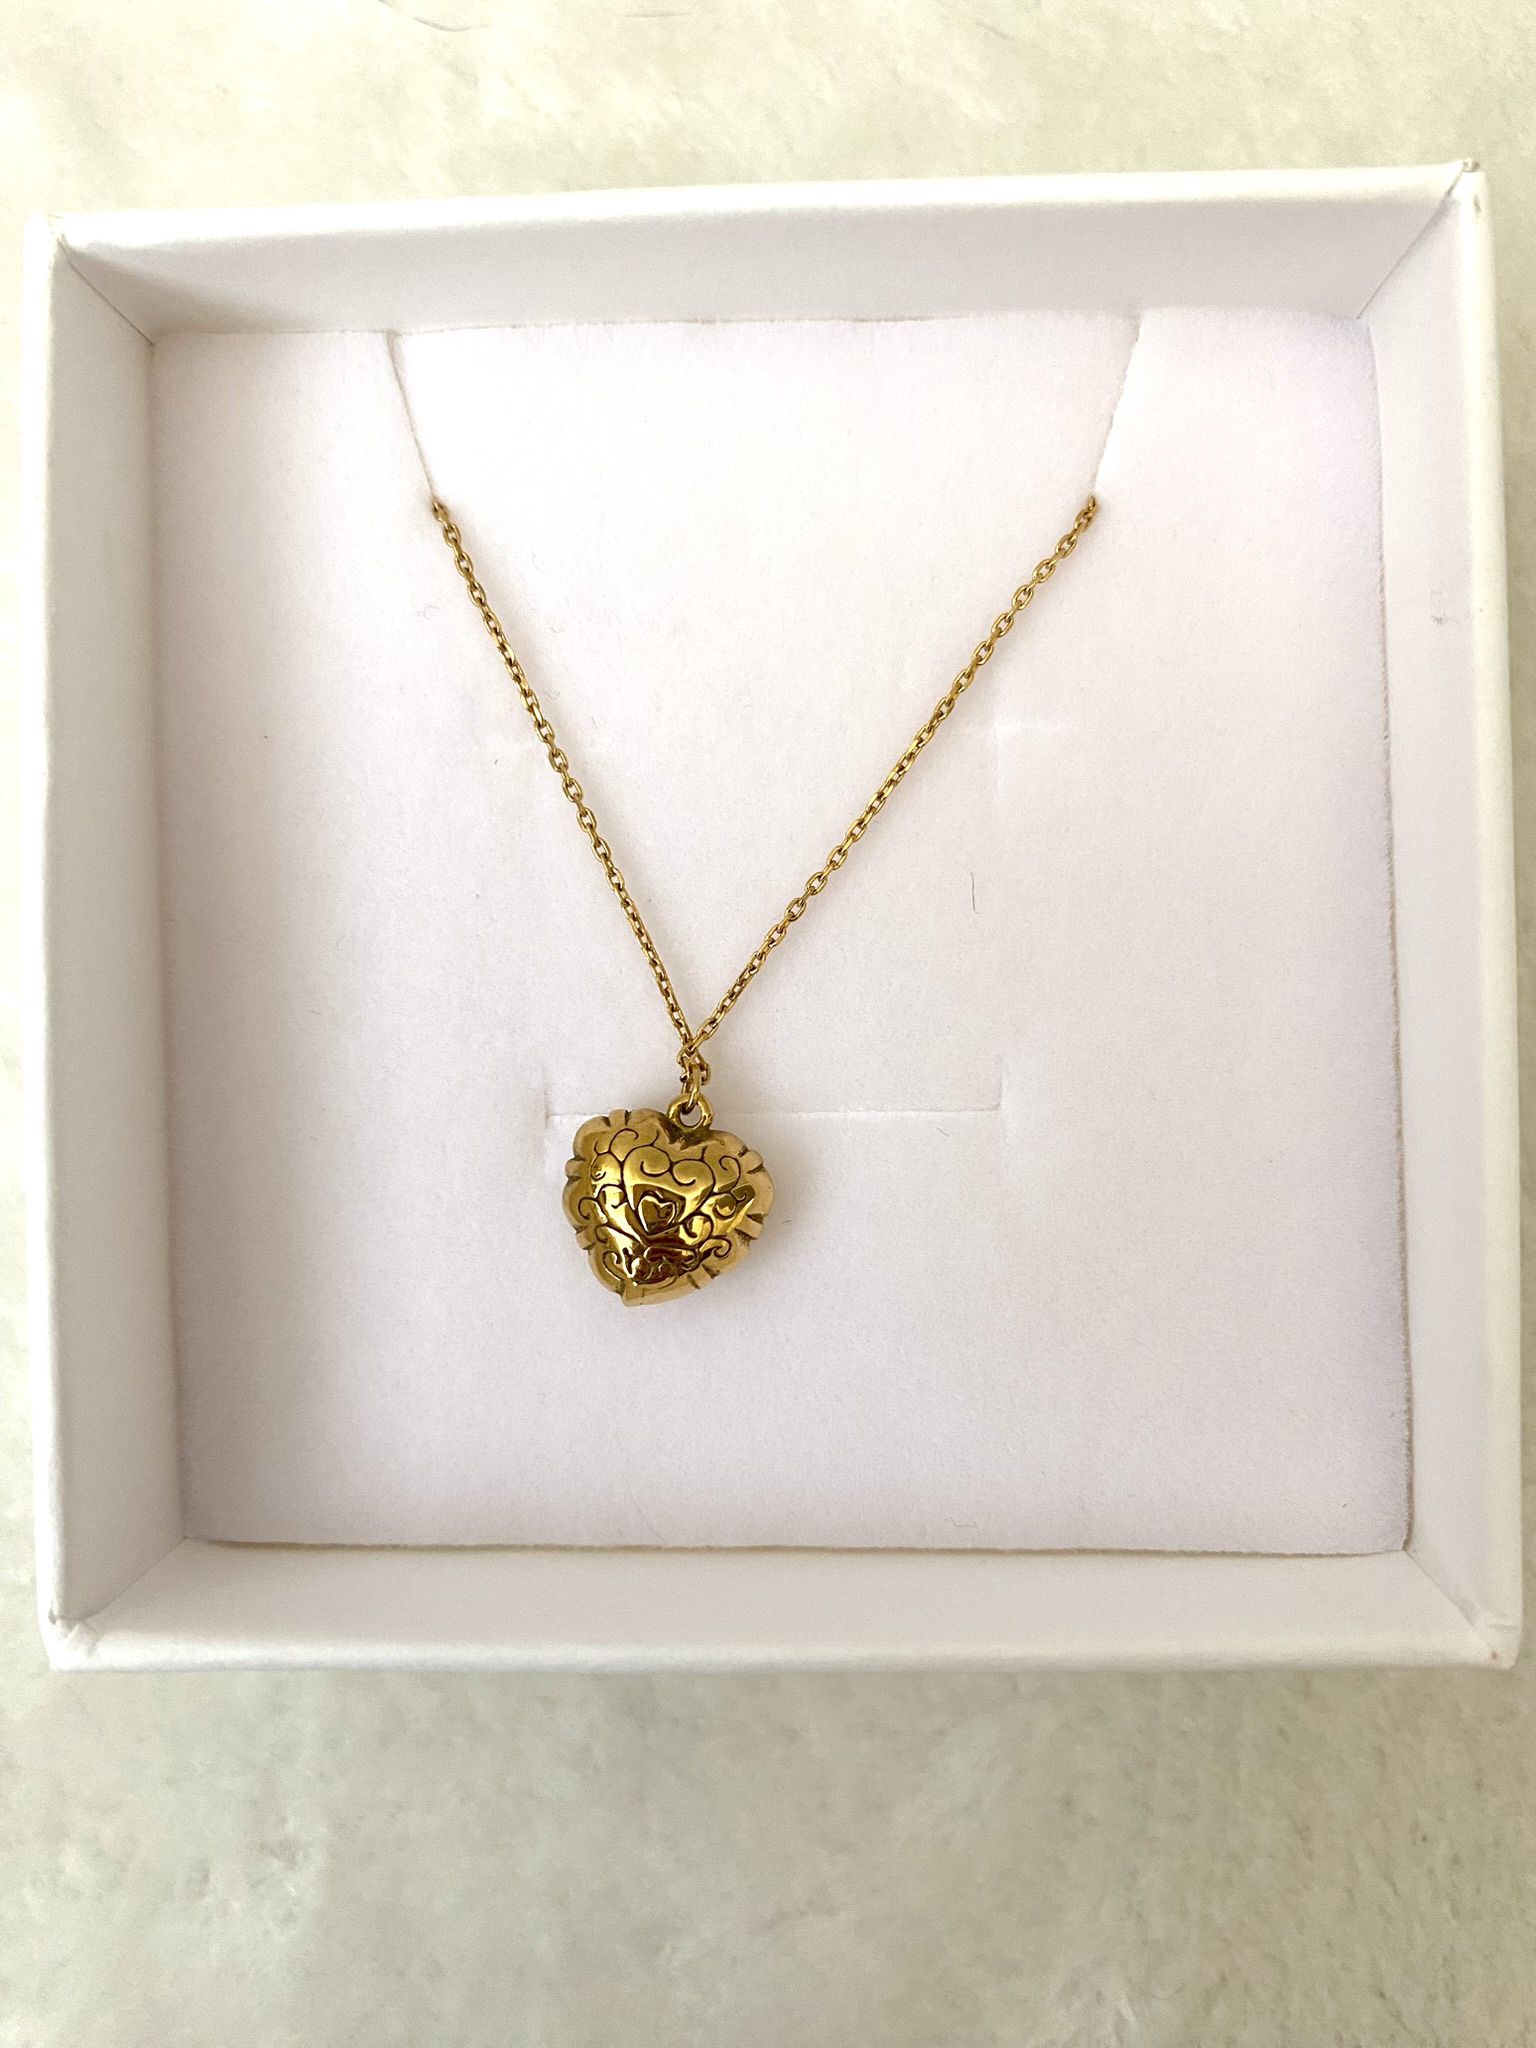 NEW Vintage 18k Gold Pearl Heart Charm Necklace